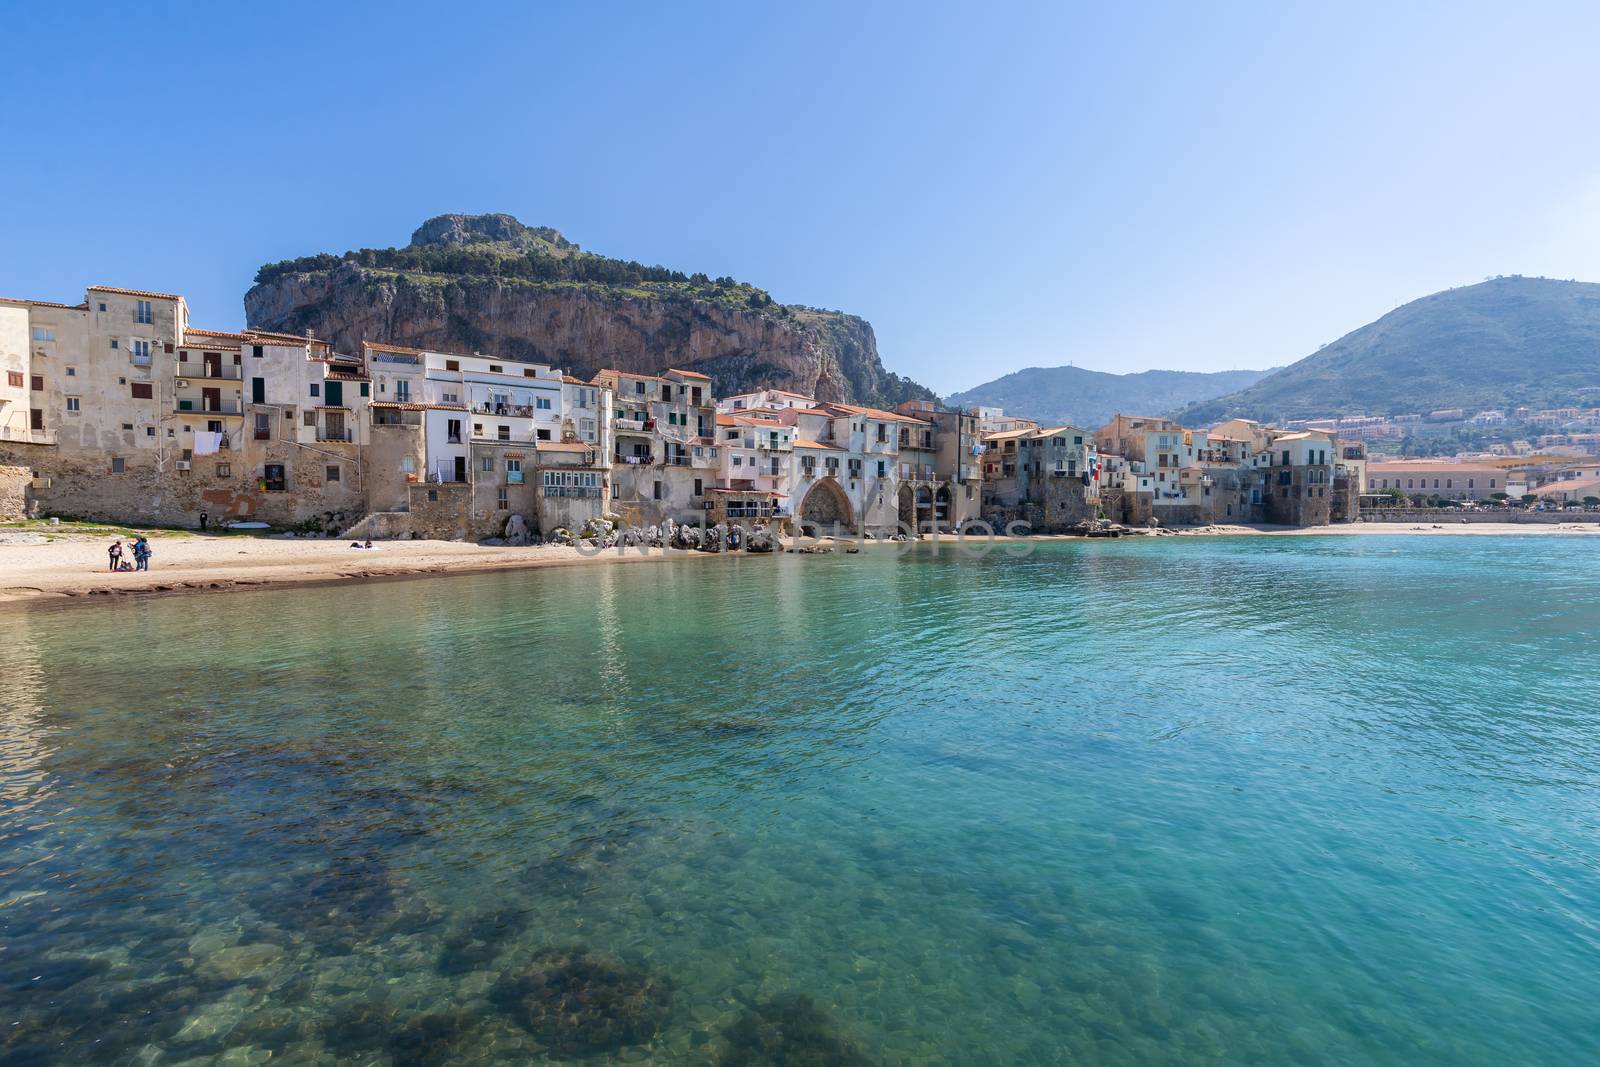 Idyllic view of turquoise sea and houses with Rocca di Cefalu rocky mountain in the background seen from historical old harbour of Cefalu, Sicily, Italy. by tamas_gabor